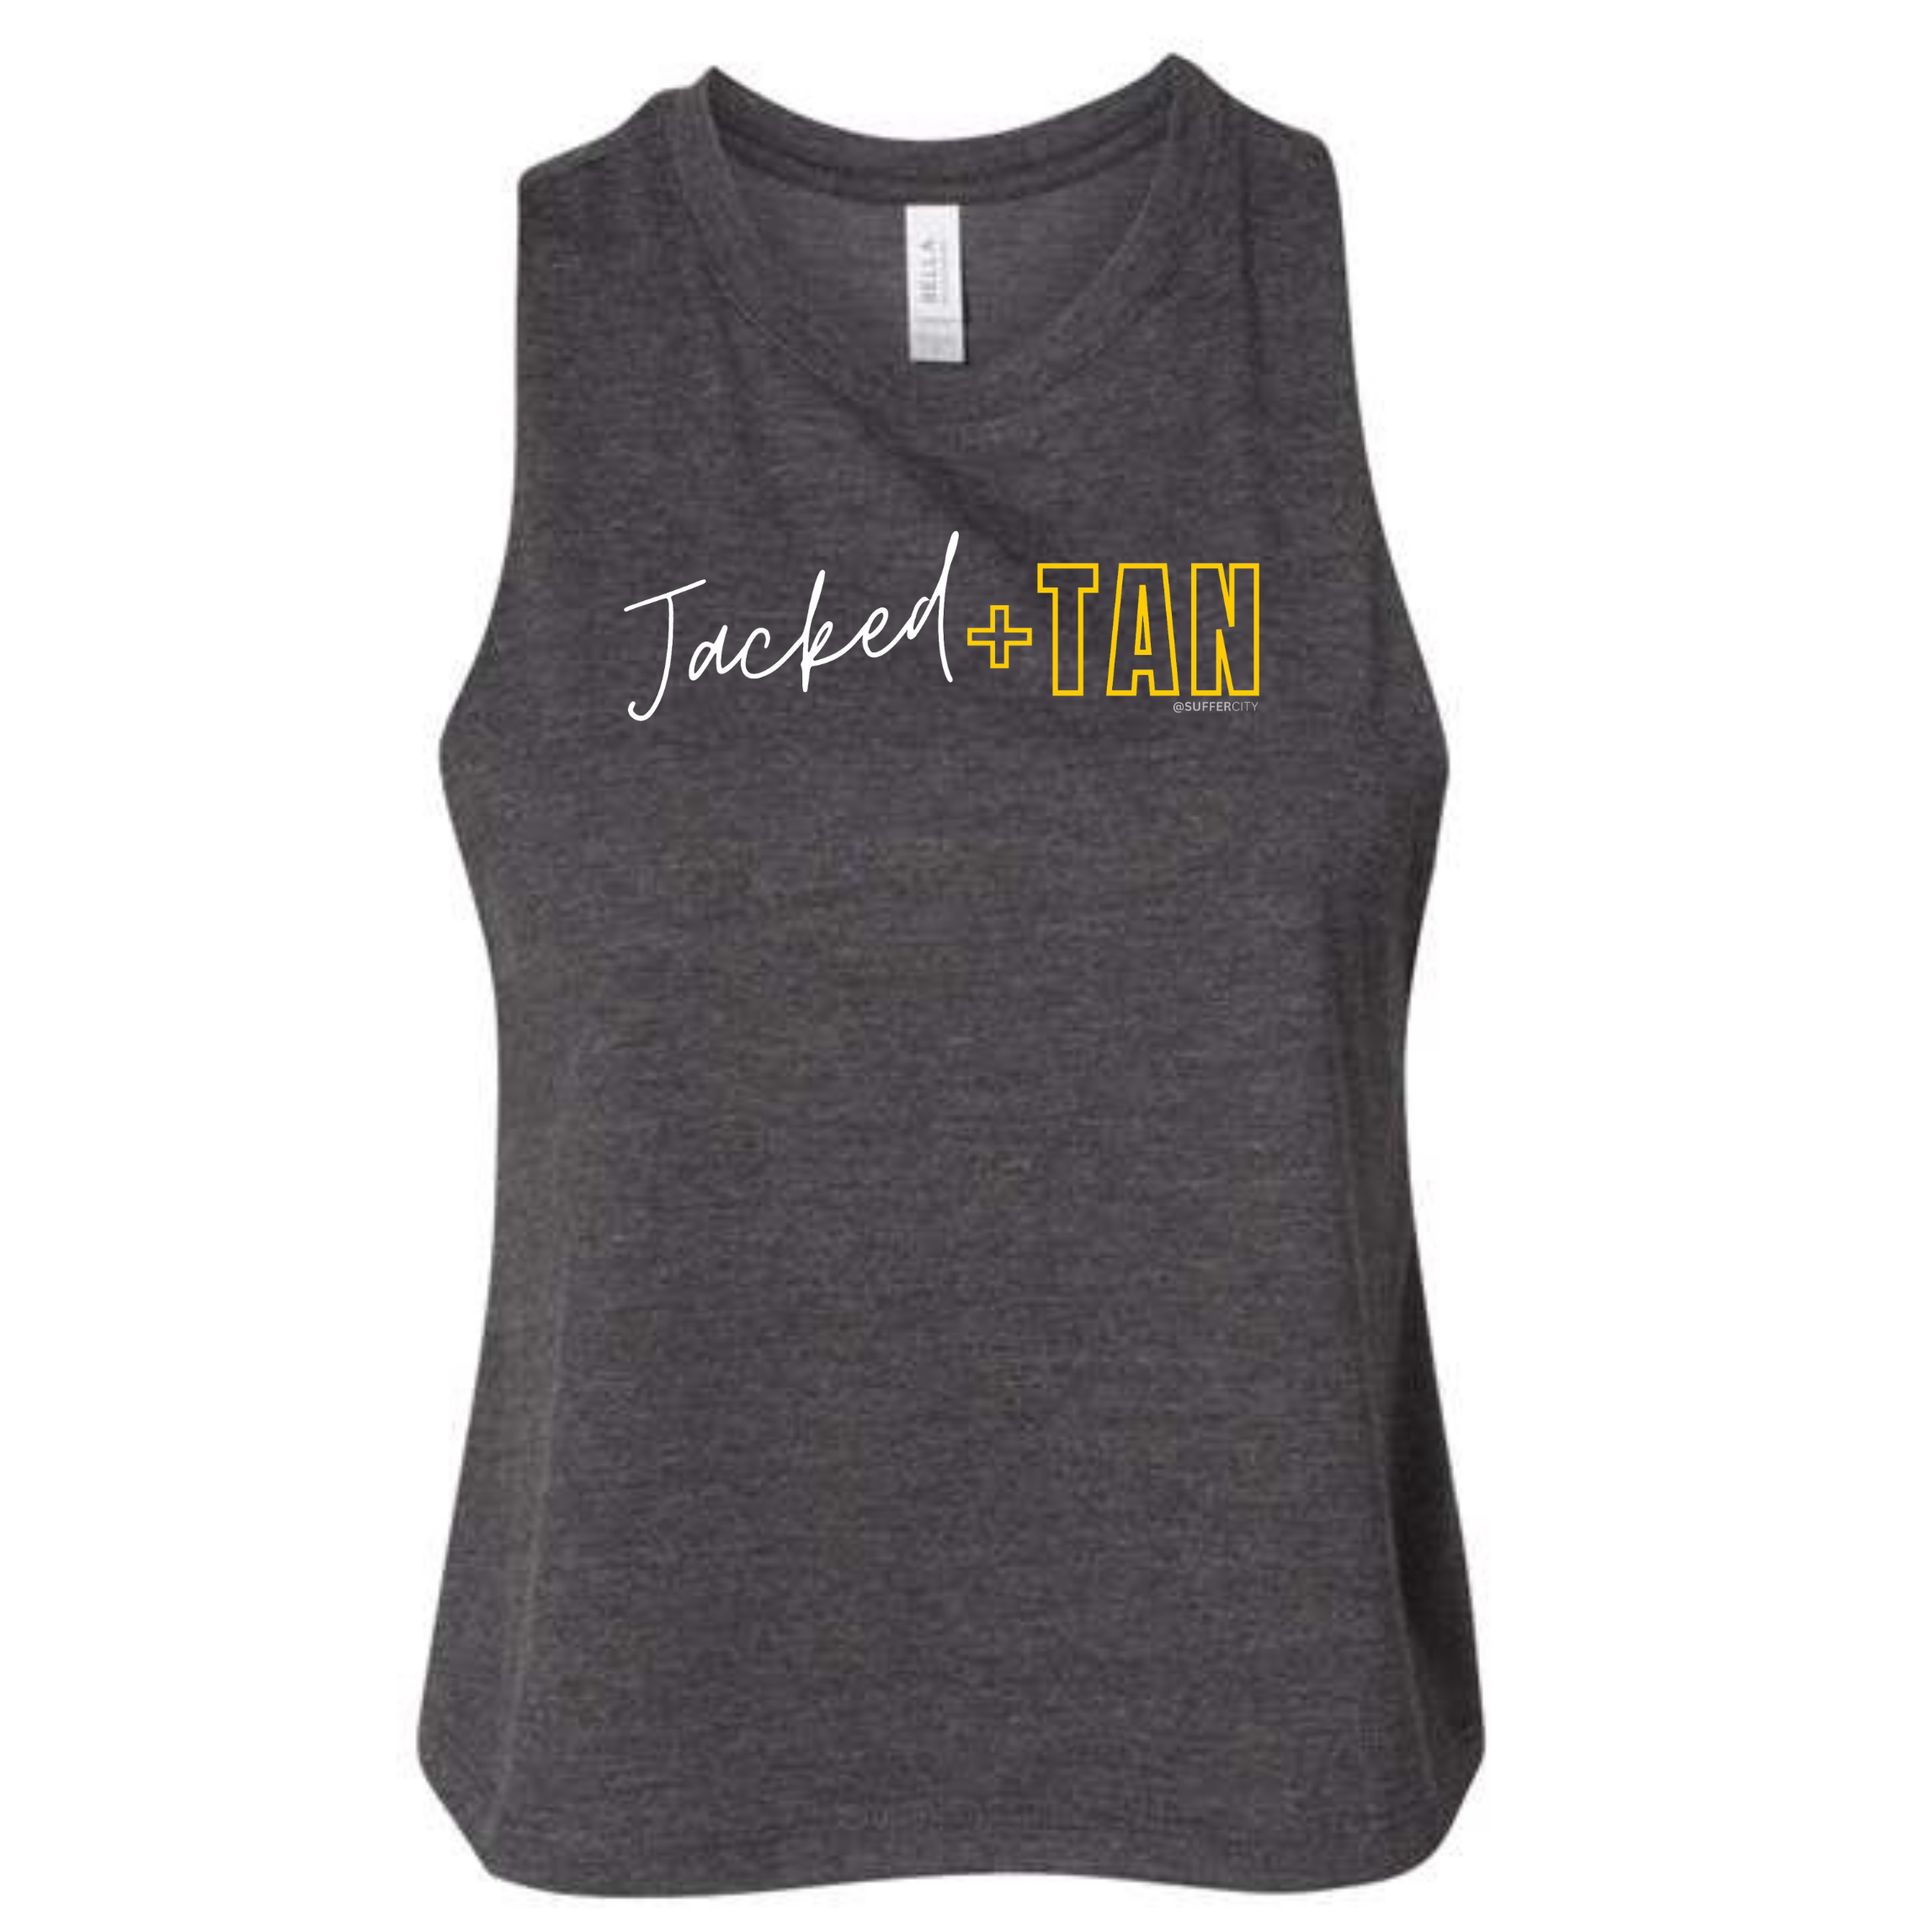 Jacked & Tan “Cooler" Options